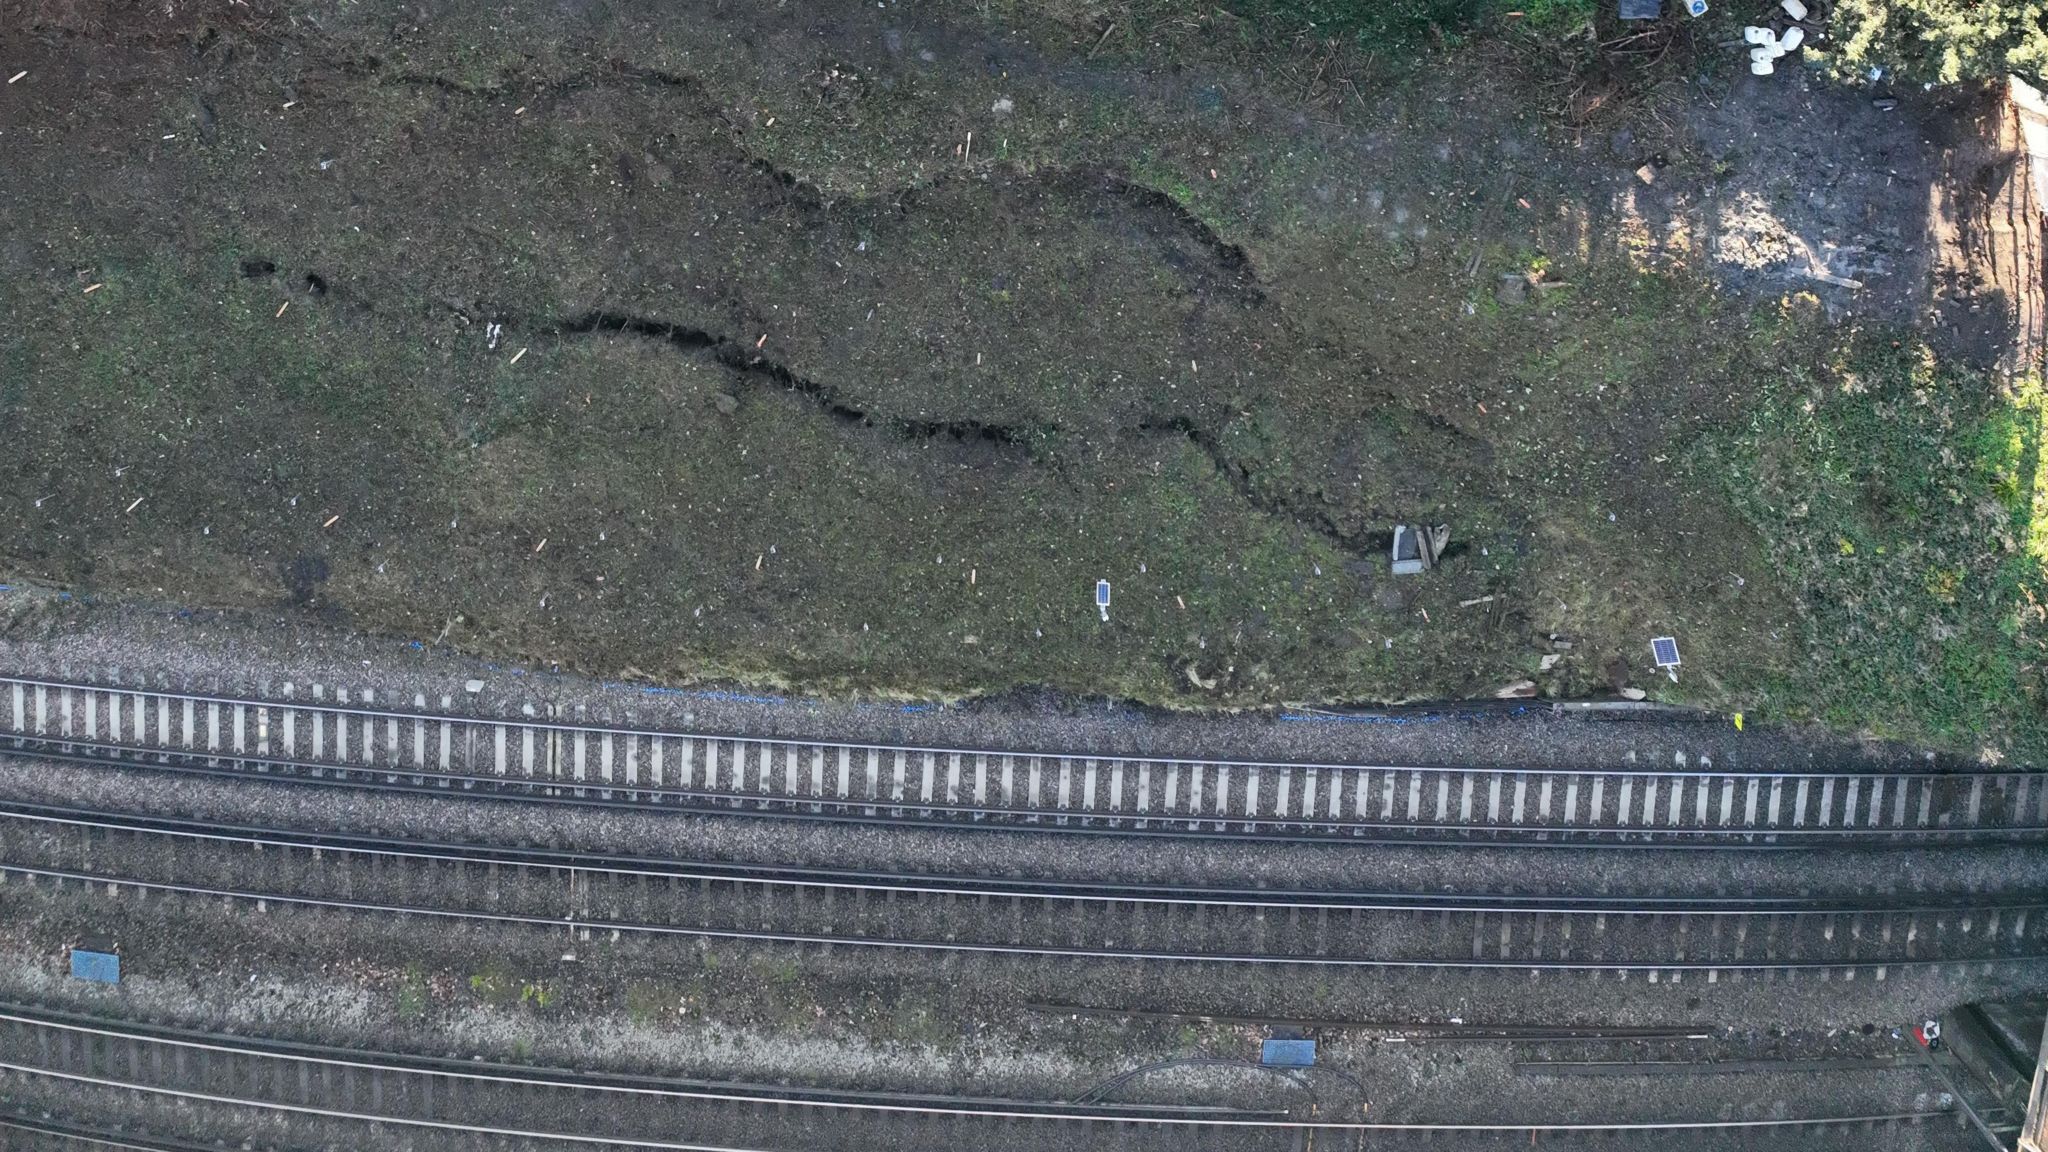 Cracks in the ground next to the train track